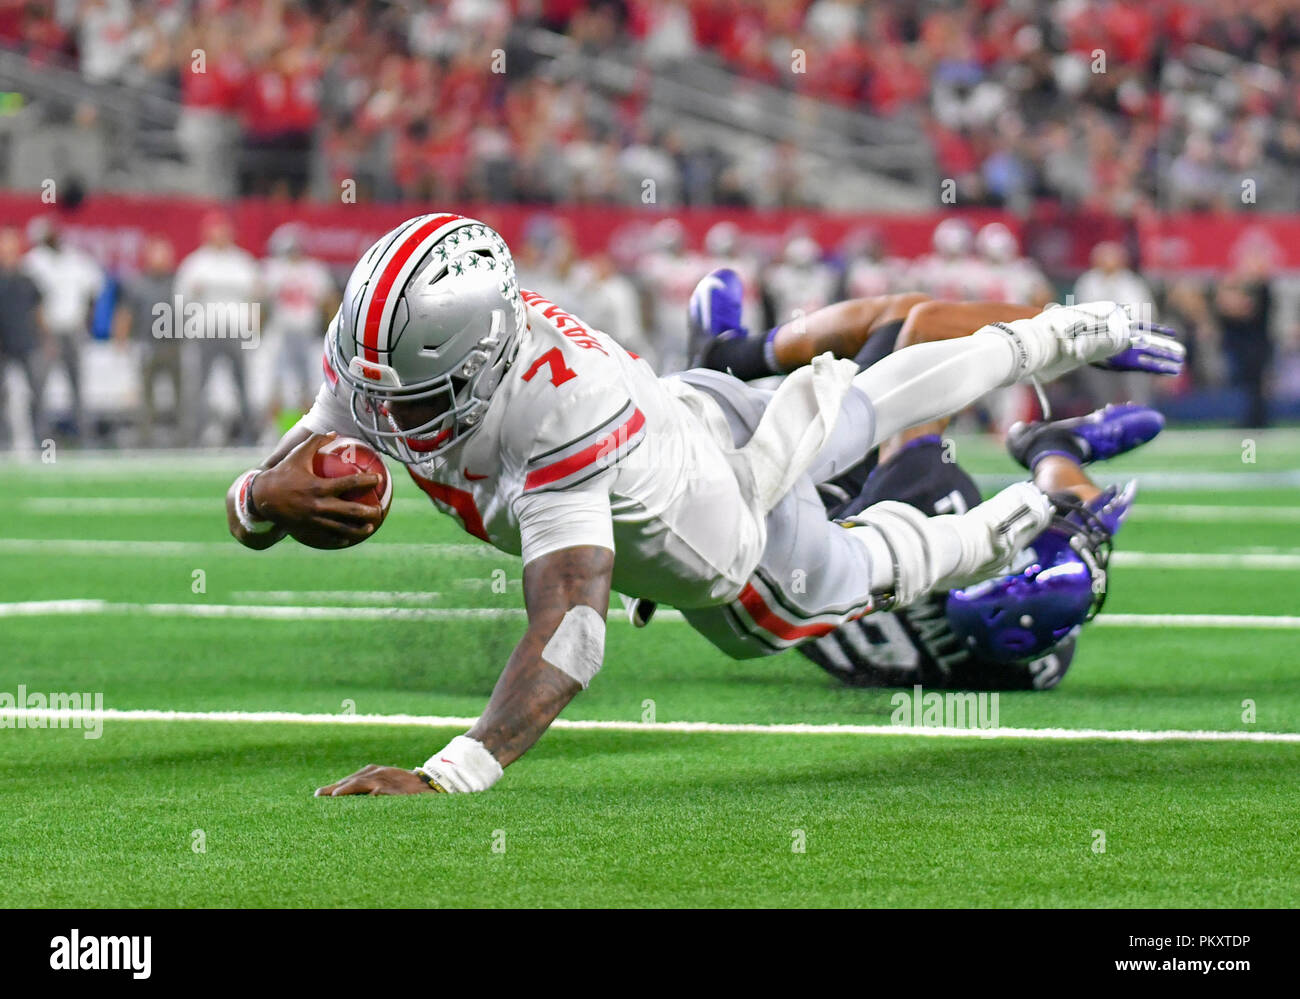 Texas, USA. 15th September 2018. September 15, 2018: Ohio State Buckeyes  quarterback Dwayne Haskins #7 scores on a 5 yard run as he dives across the  goal line in the fourth quarter